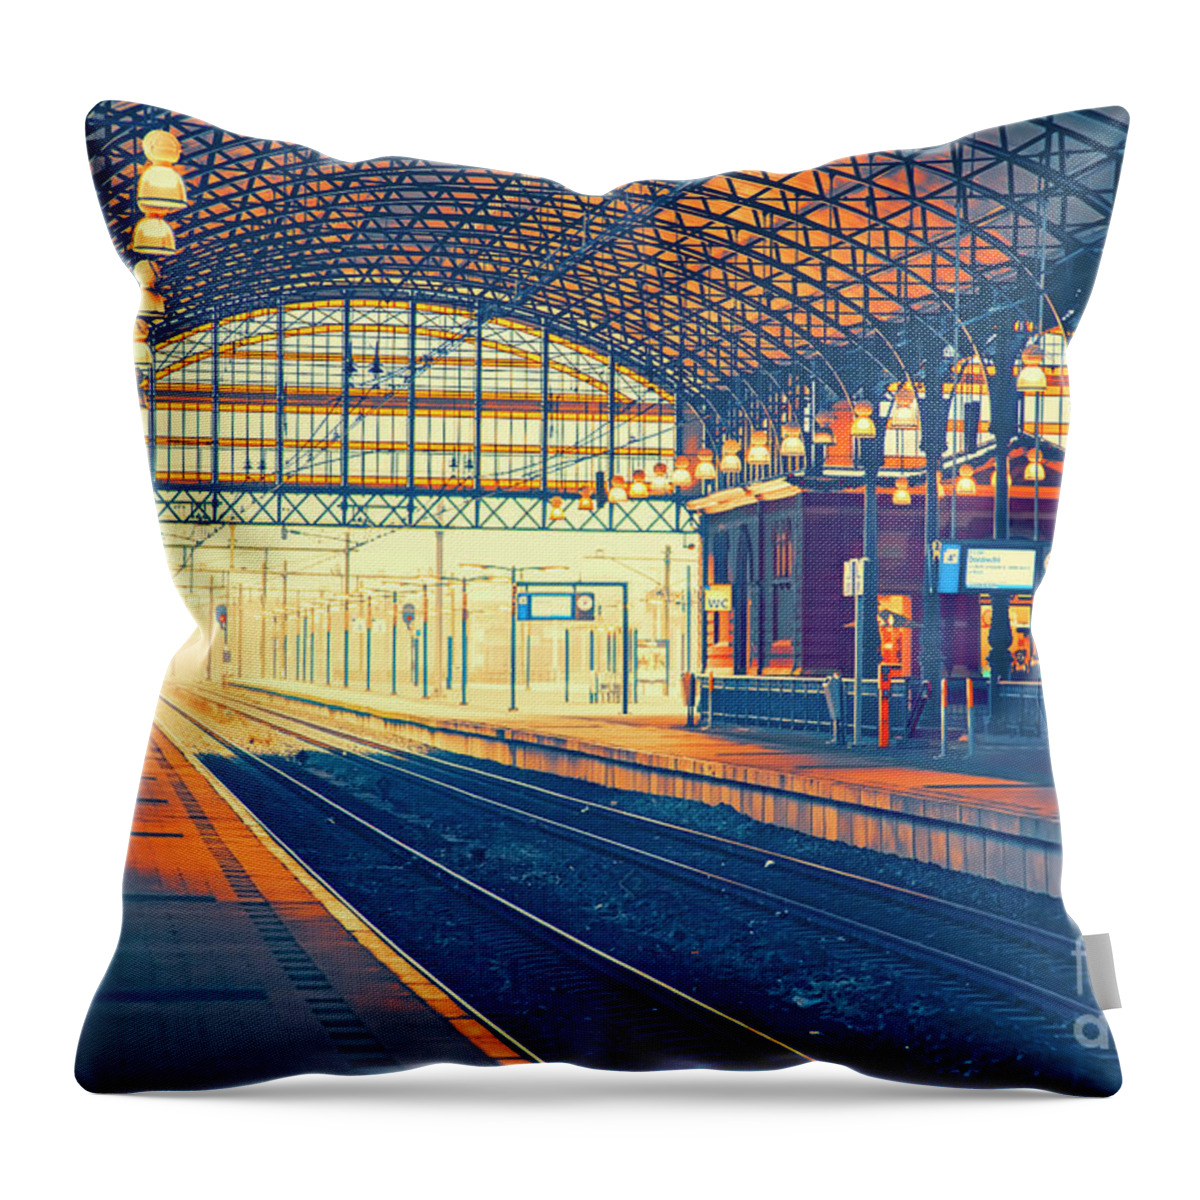 Day Throw Pillow featuring the photograph Empty Rail Station by Ariadna De Raadt